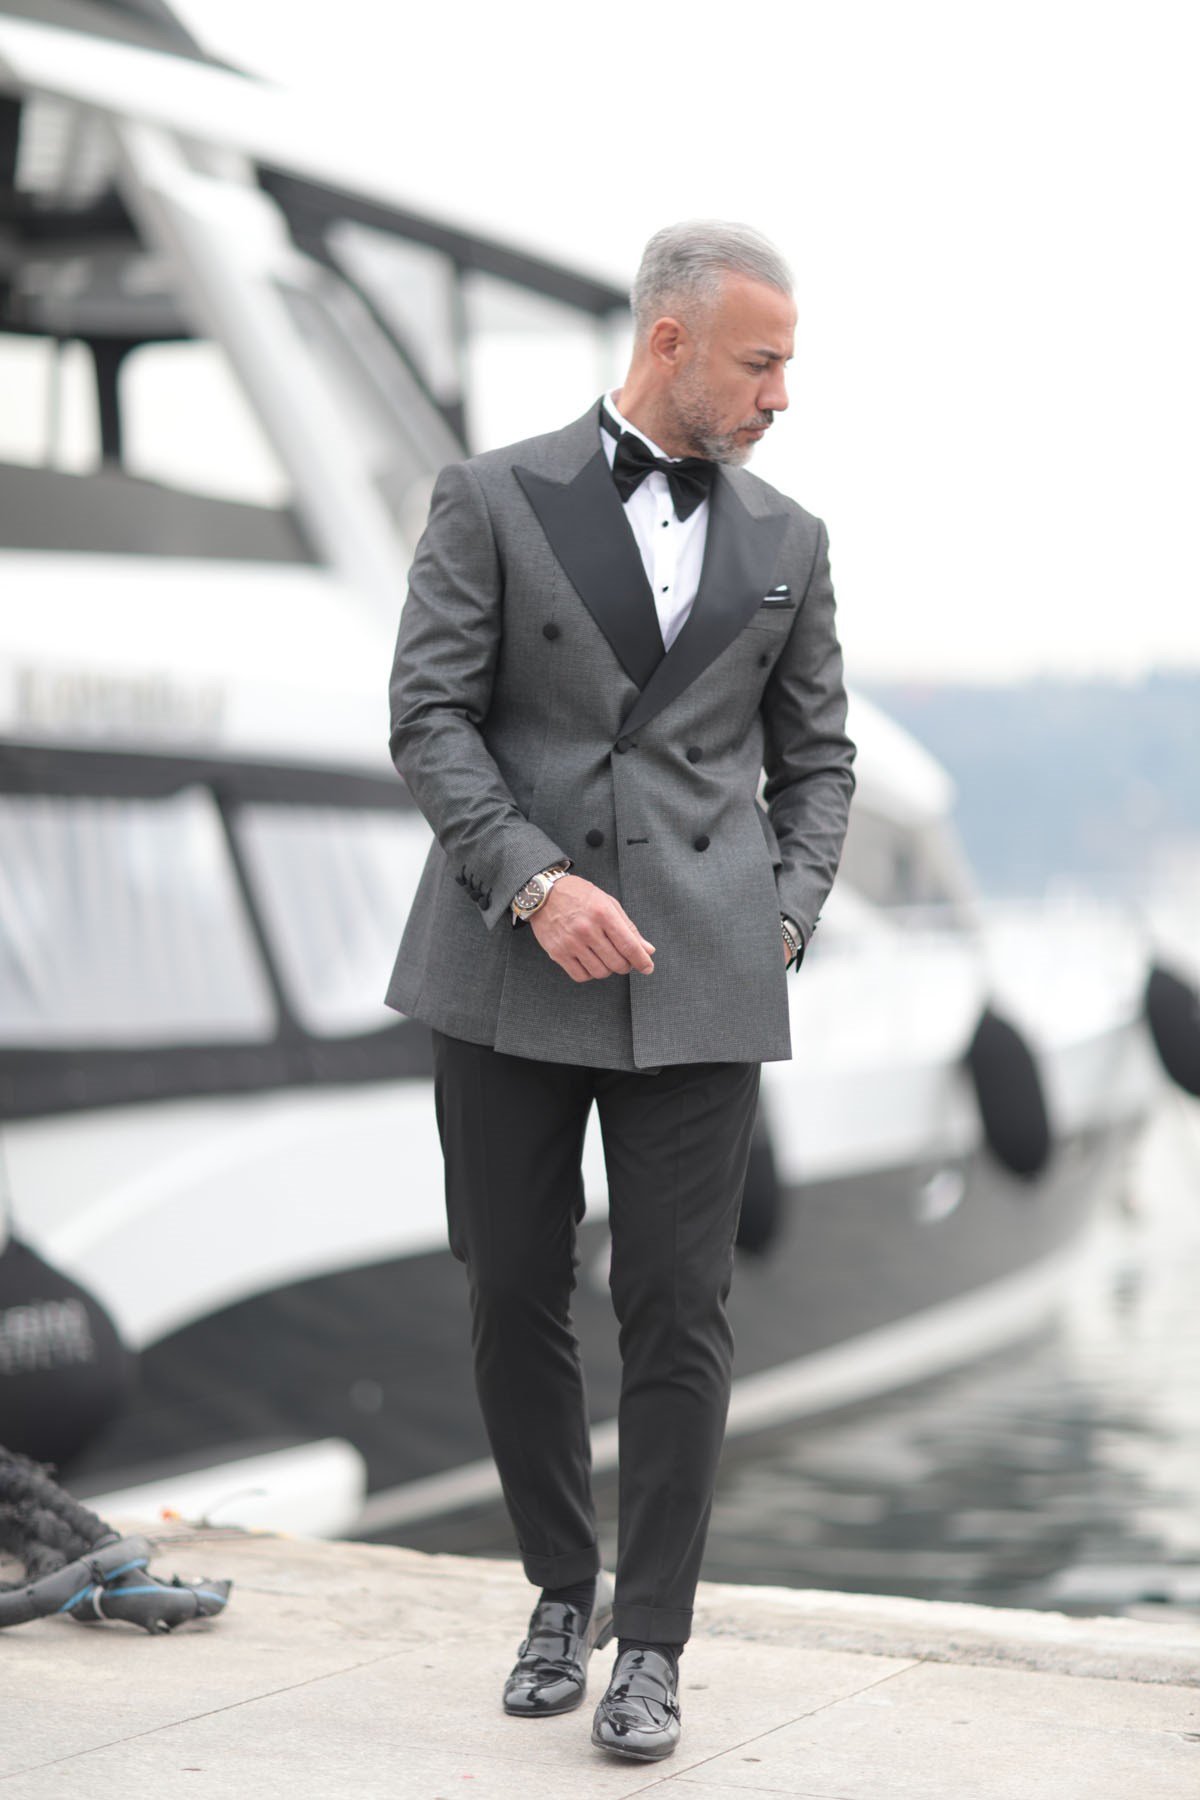 BLACK DOUBLE BREASTED WEDDİNG SUİT - SLIM FIT